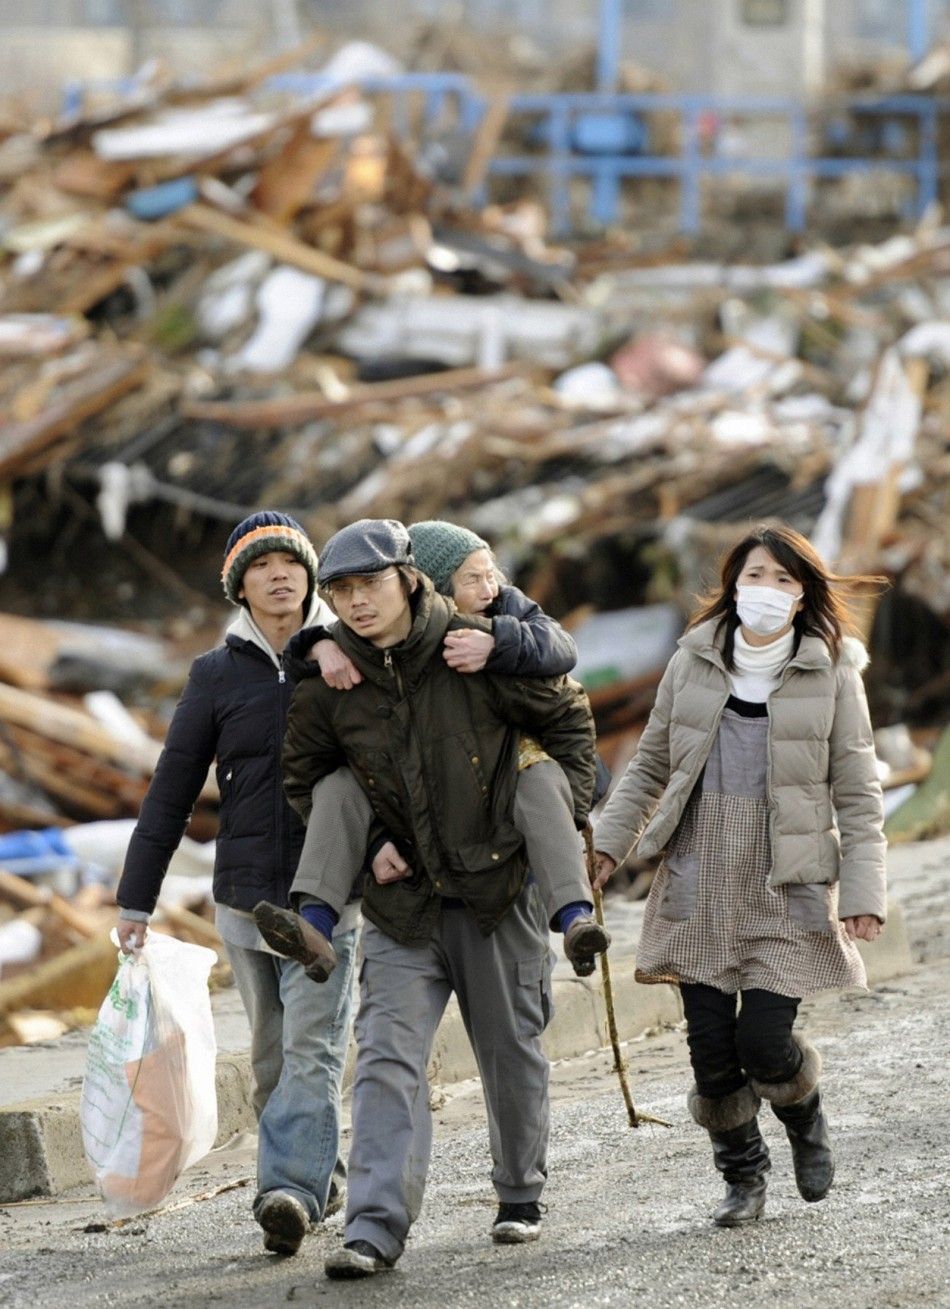 Scenes of destruction in aftermath of Japan earthquake PHOTOS.